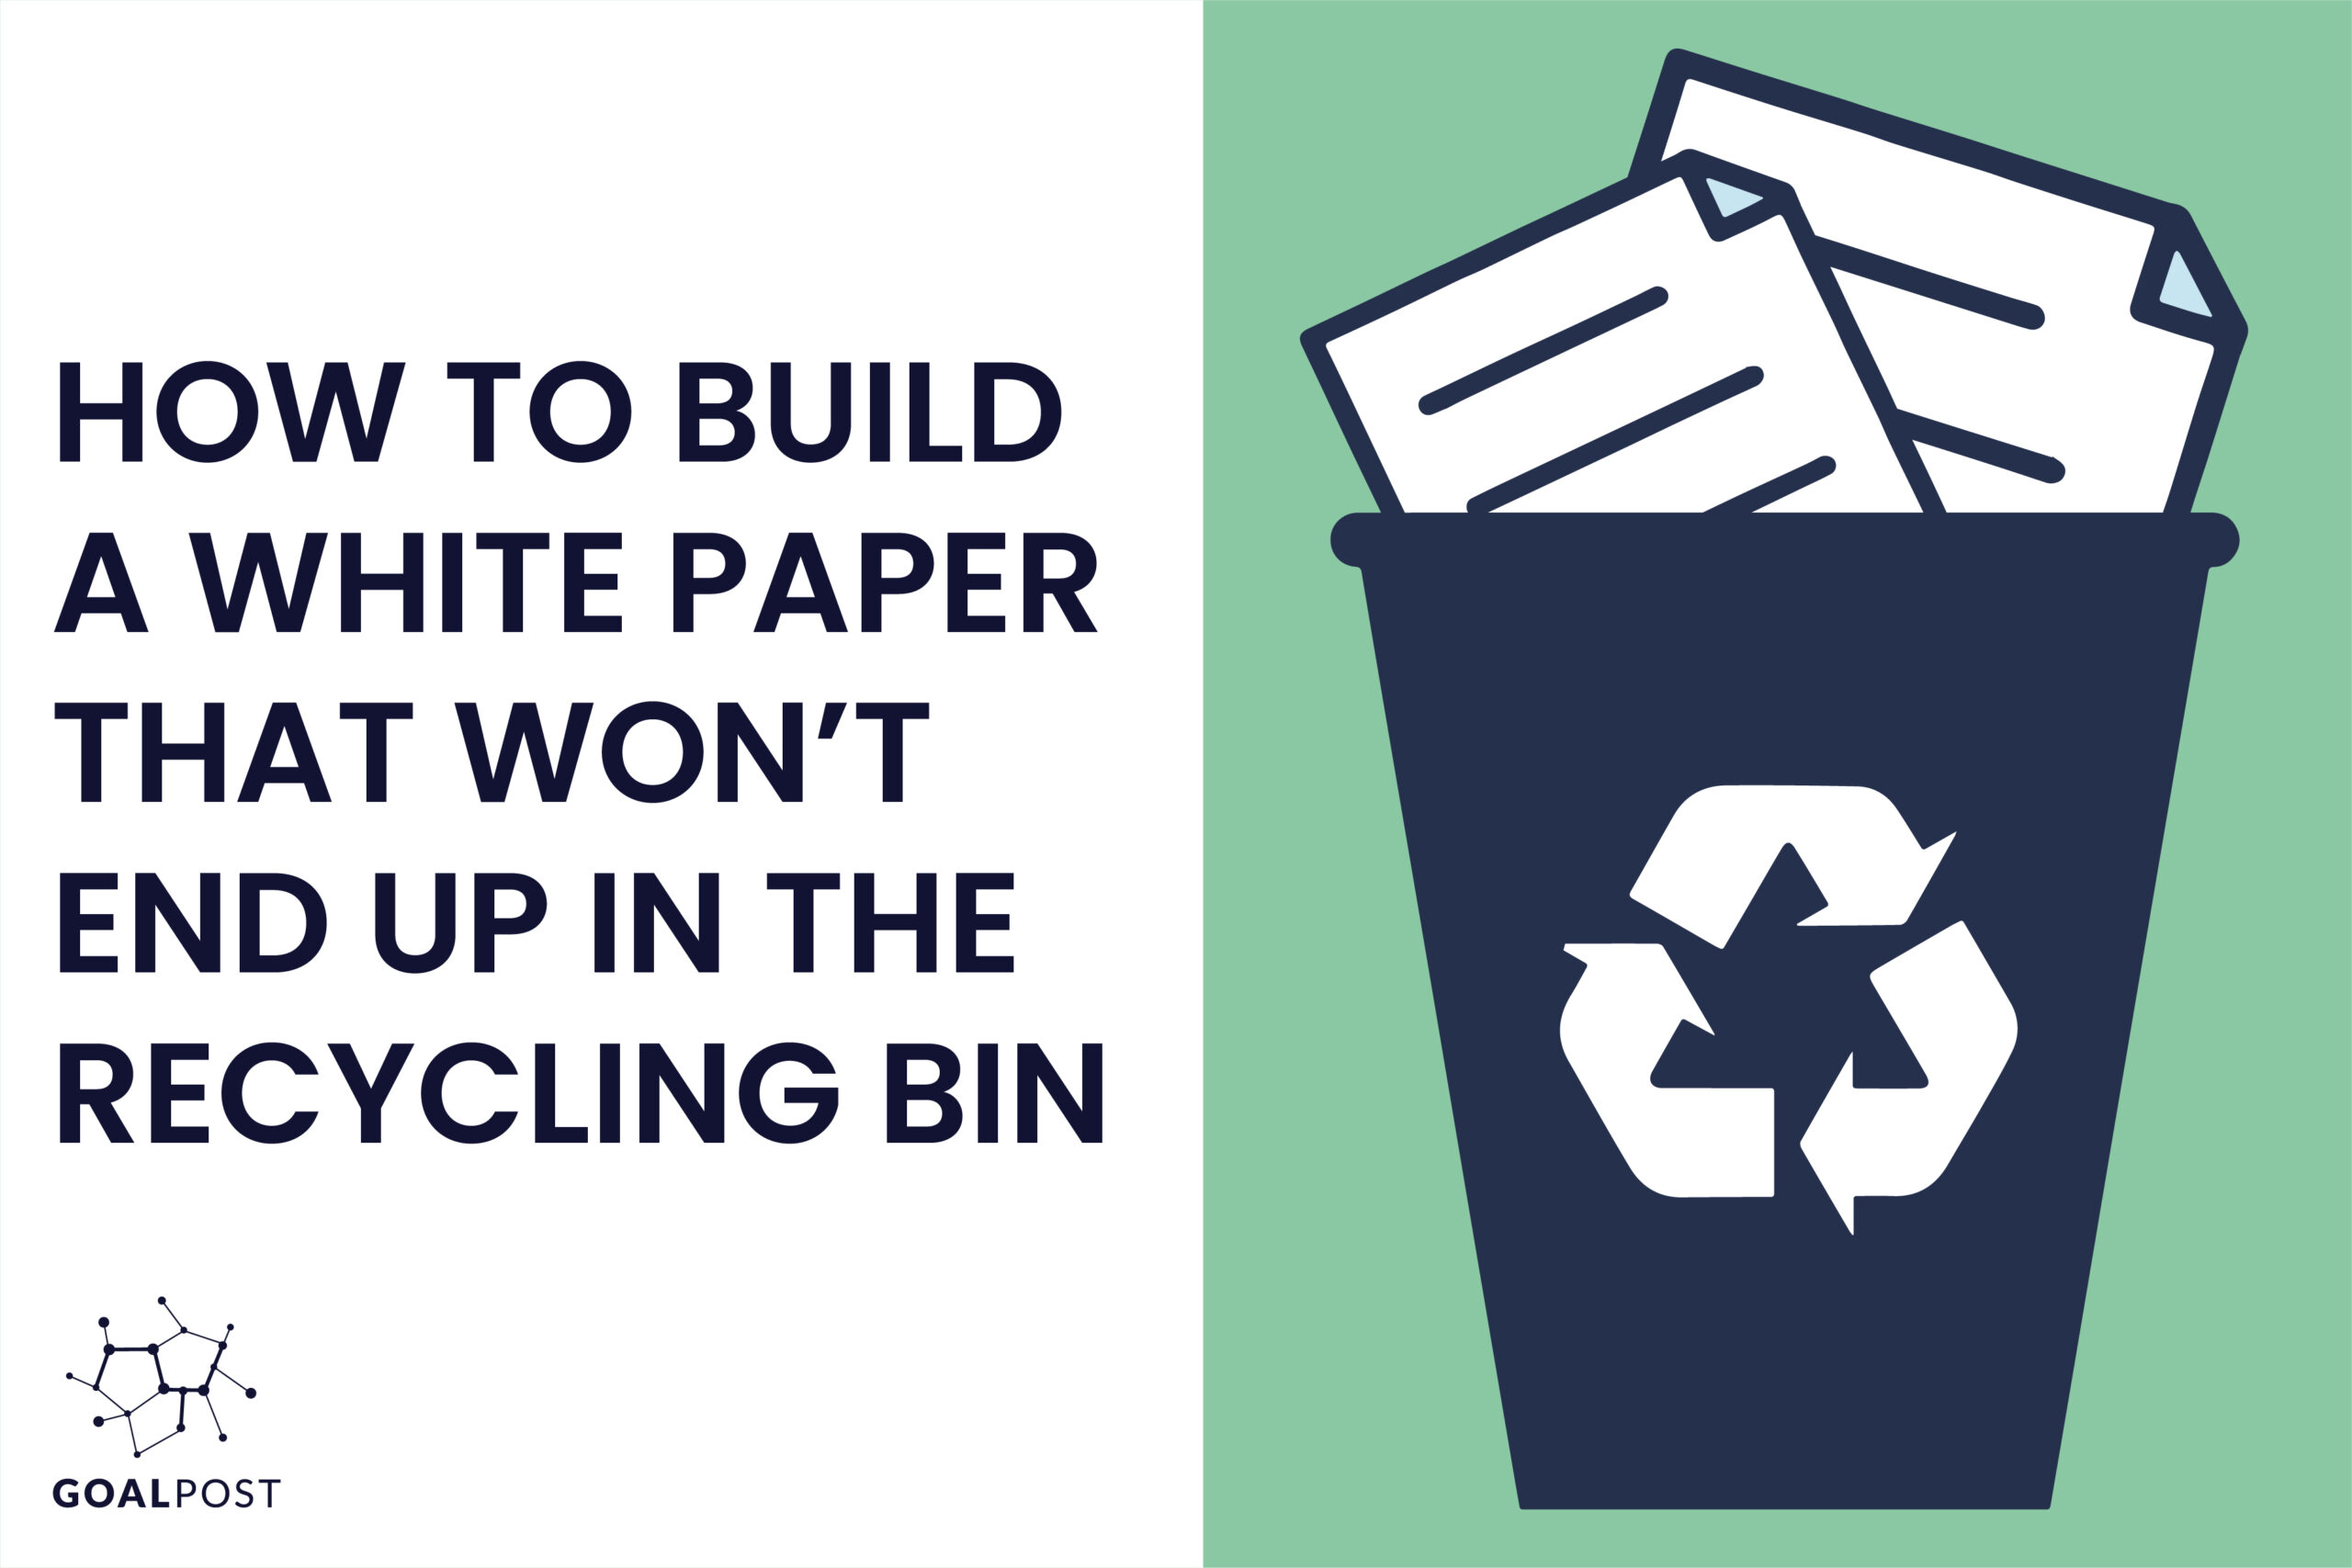 How to Build a White Paper That Won’t End Up in the Recycling Bin